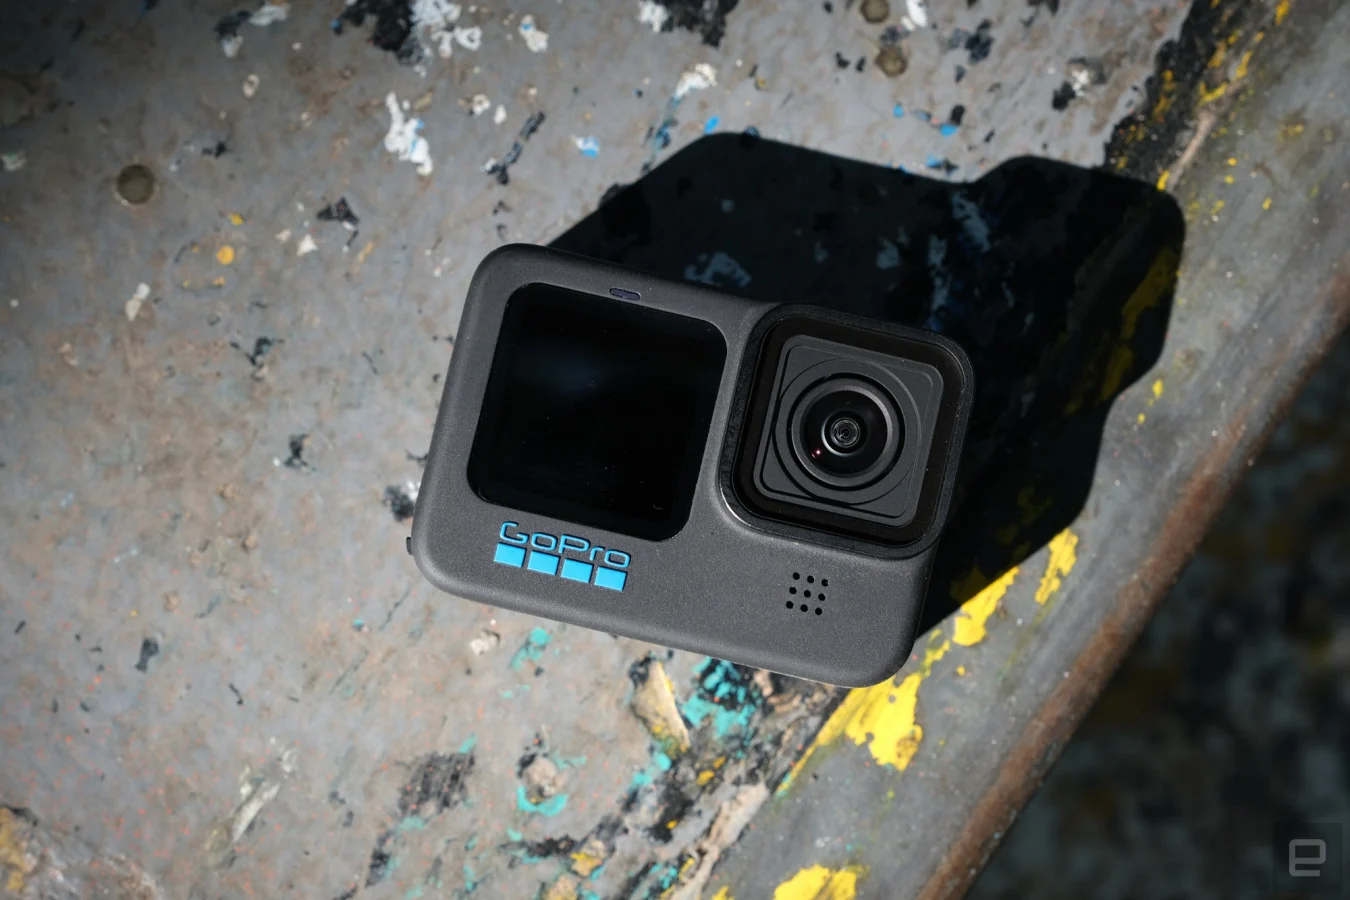 A pretty sweet picture of the new GoPro 11 if I do say so myself.